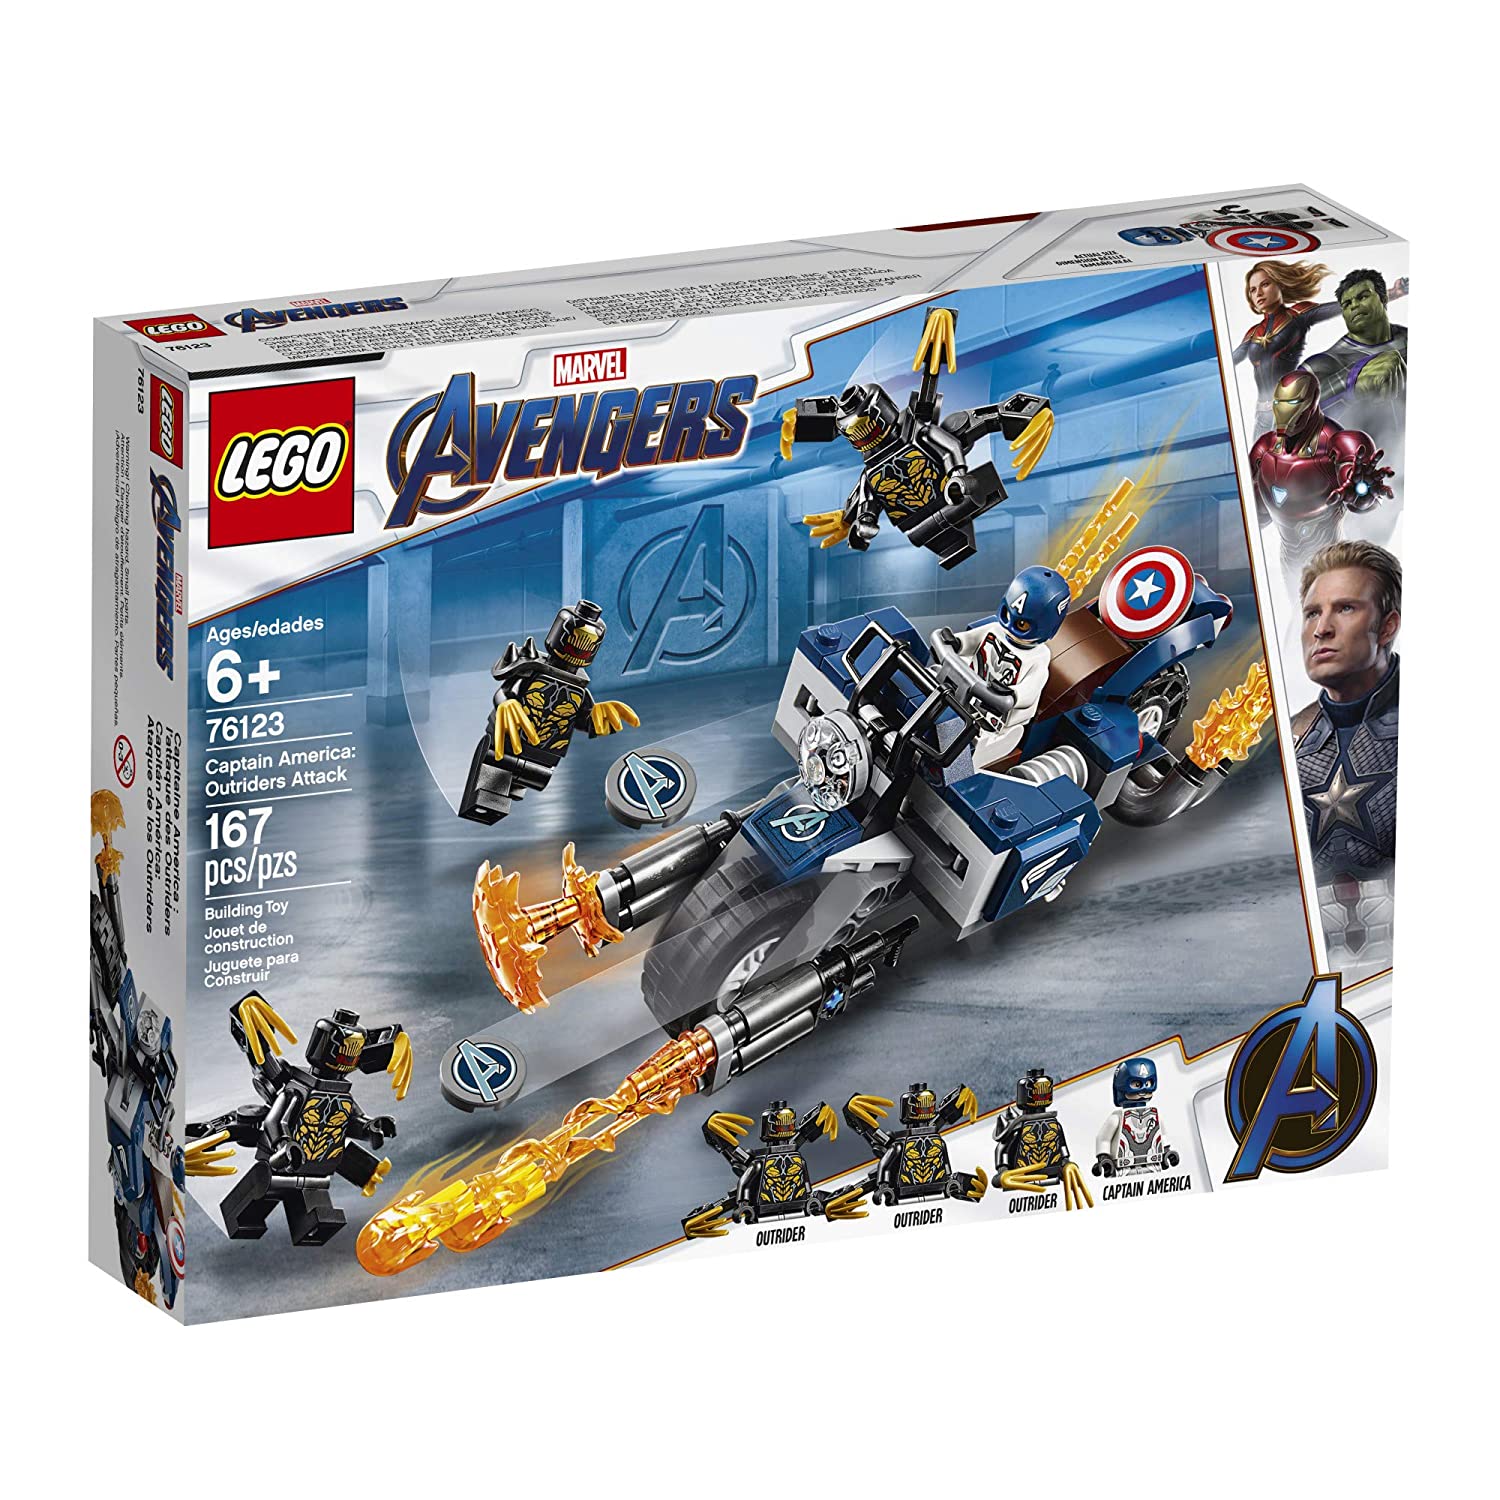 Top 9 Best LEGO Captain America Sets Reviews in 2022 1